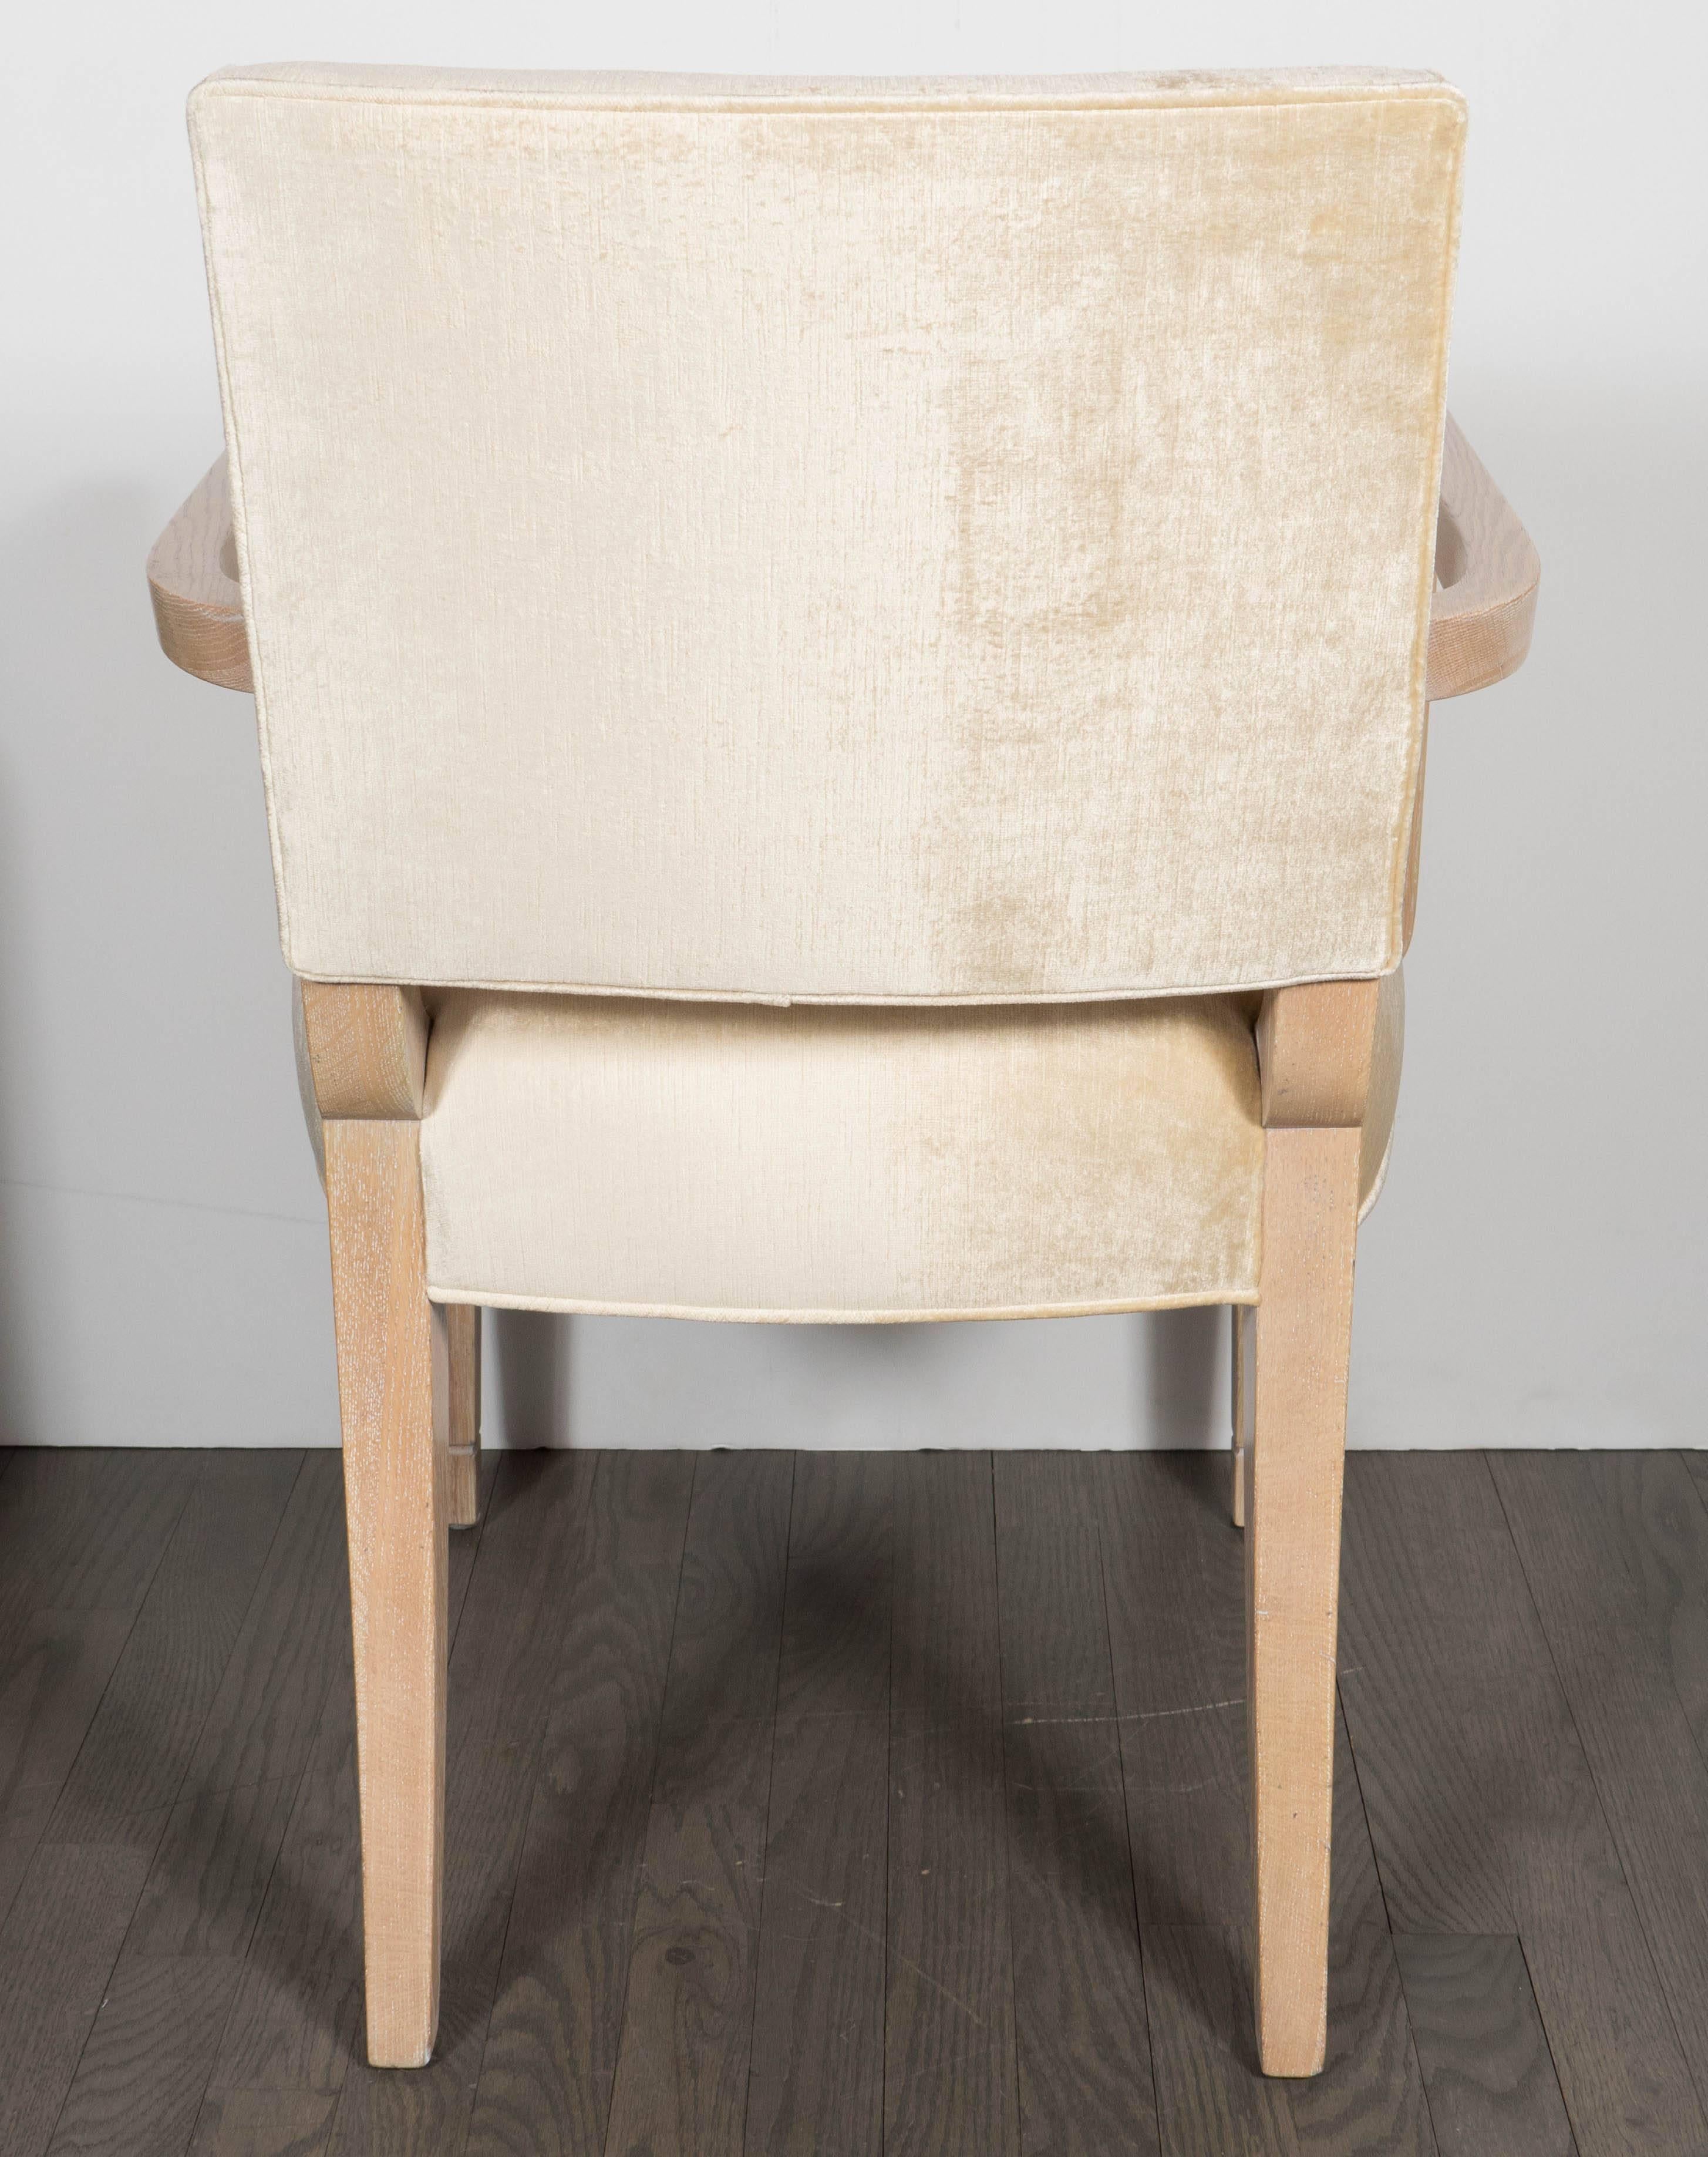 Mid-20th Century Eight Dining Chairs in White Oak for Schmieg & Kotzian by Dorothy Draper